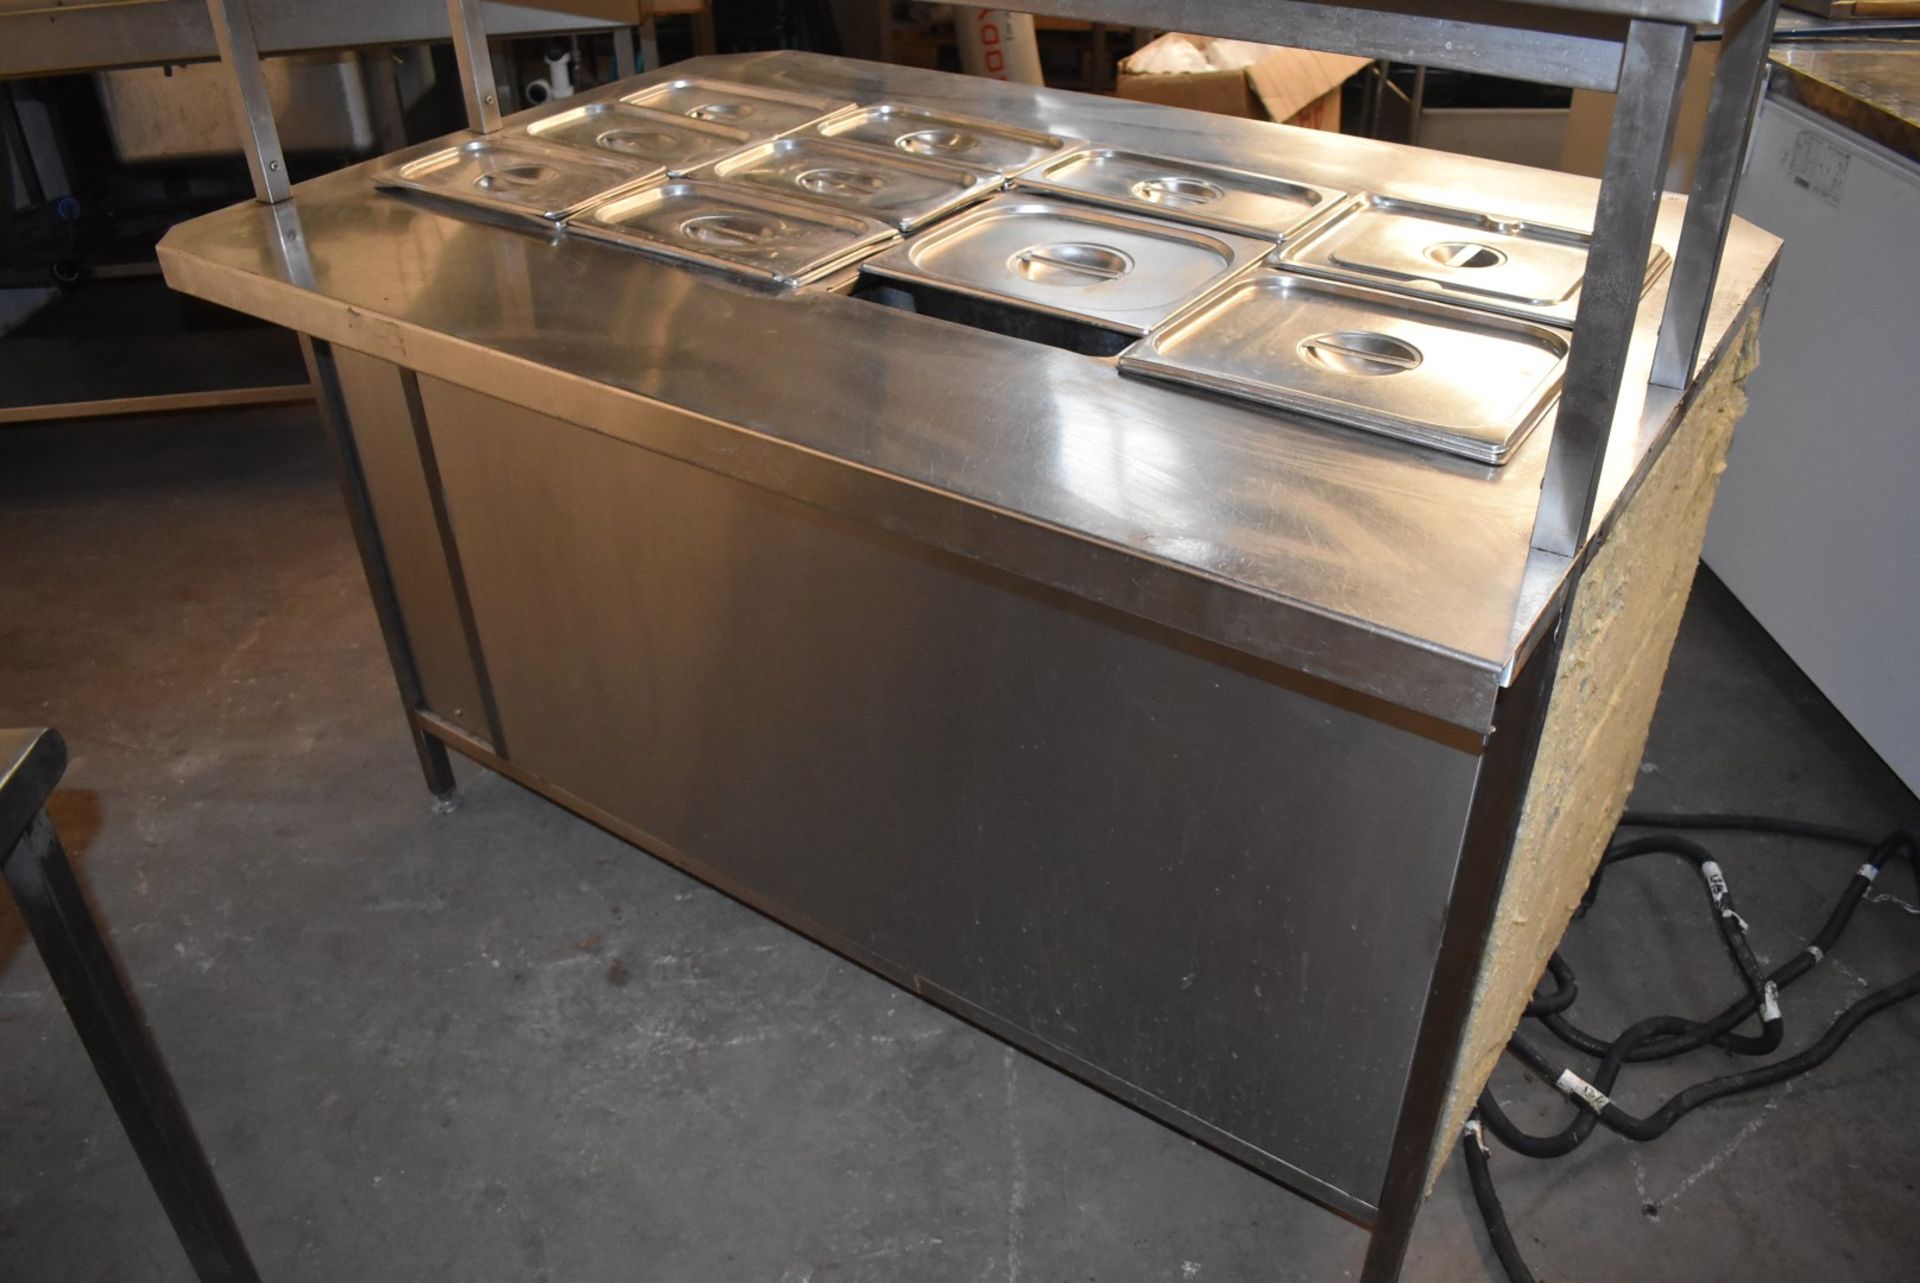 1 x Baine Marie Food Warming Island With Passthrough Plate Warmers, Hot Cupboard and 10 Gastro - Image 8 of 22